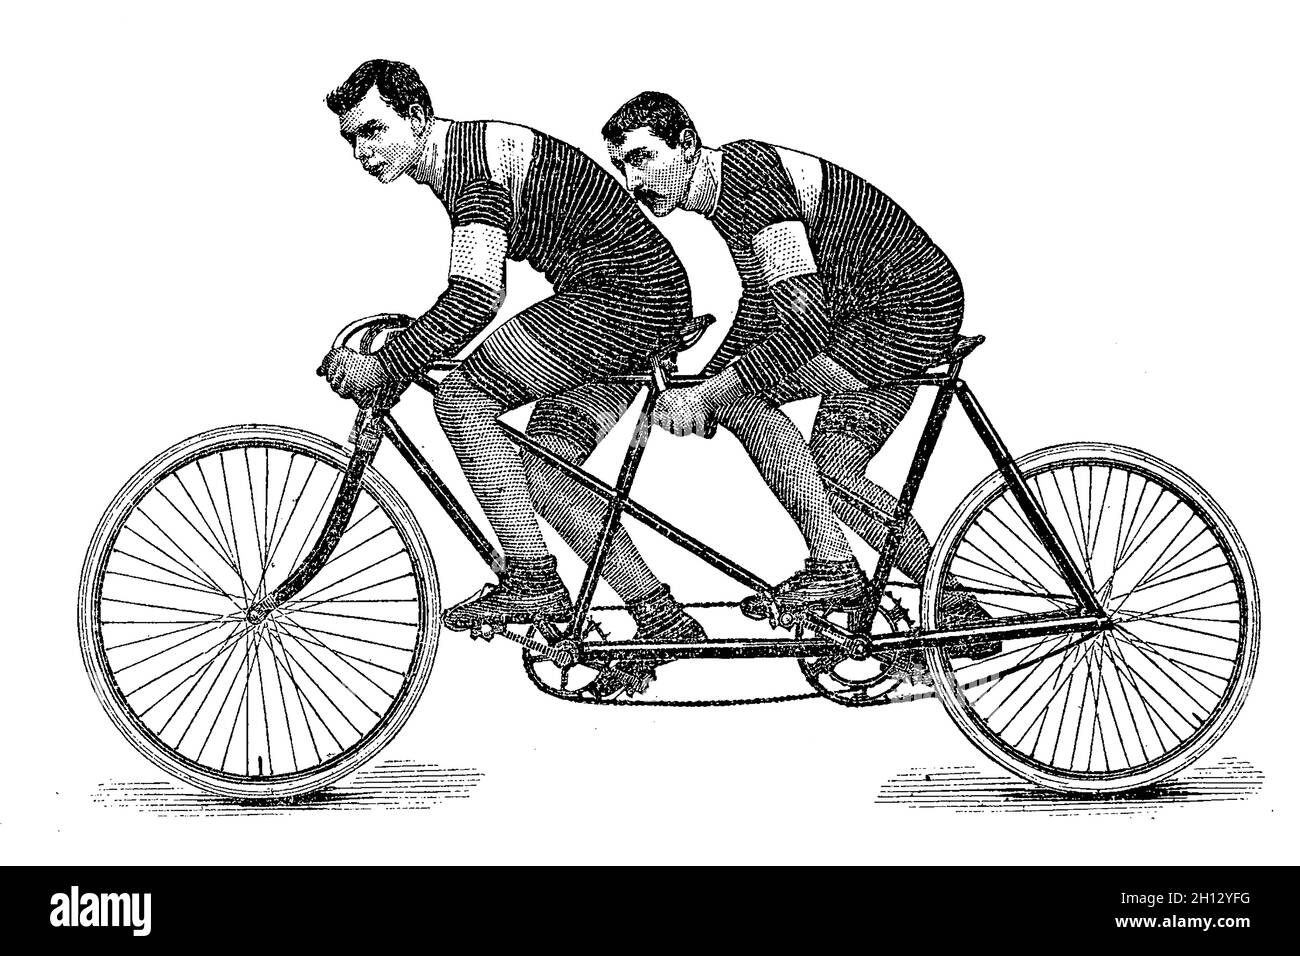 Tandem riders racing on bicycle, 19th century illustration Stock Photo